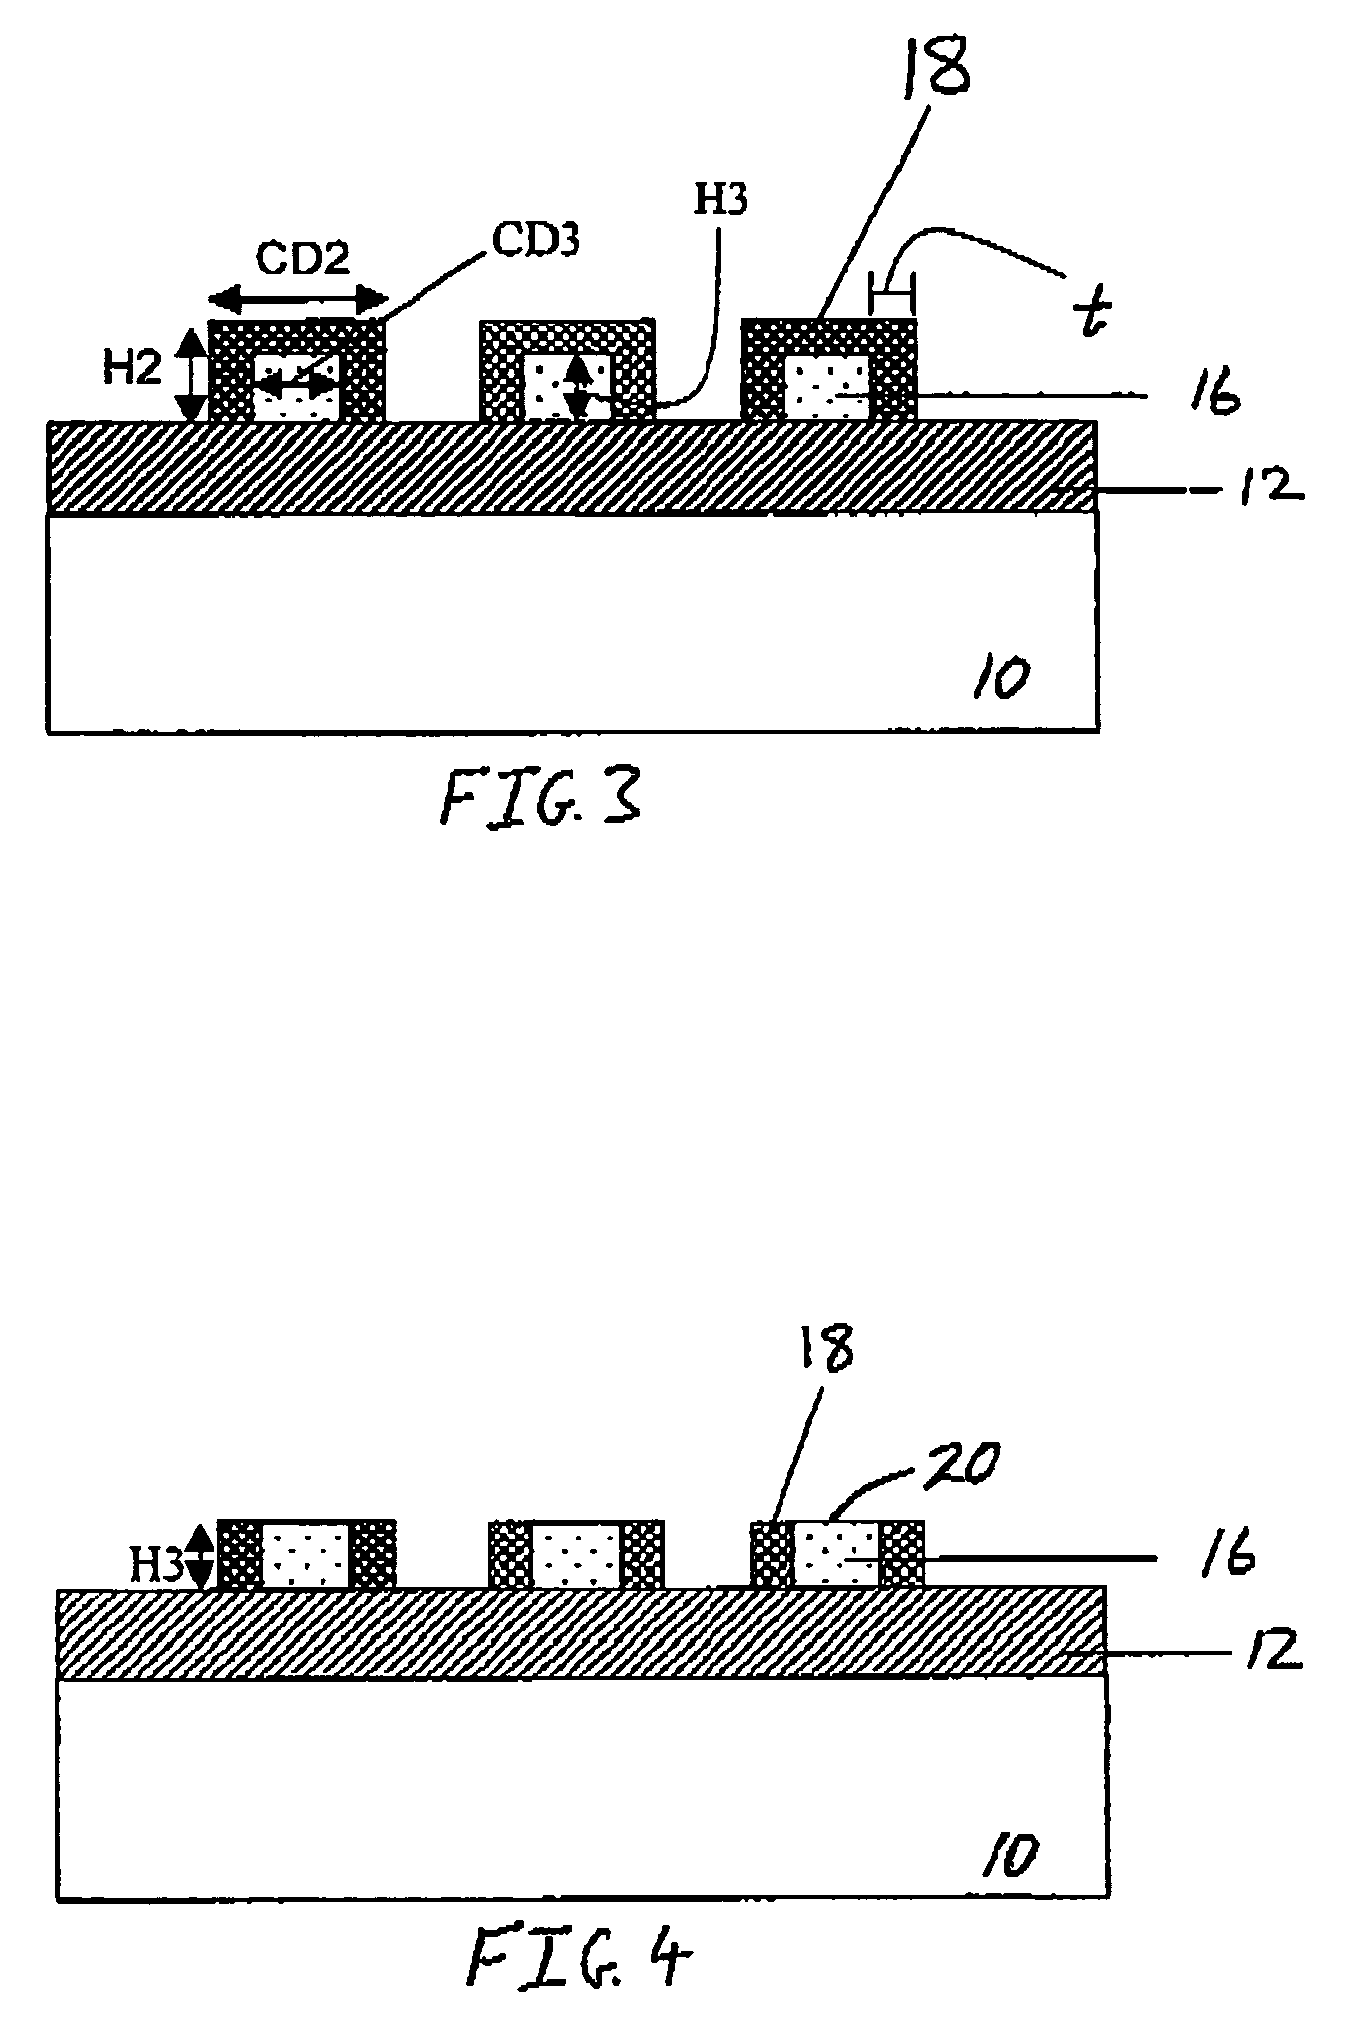 Methods for using a silylation technique to reduce cell pitch in semiconductor devices